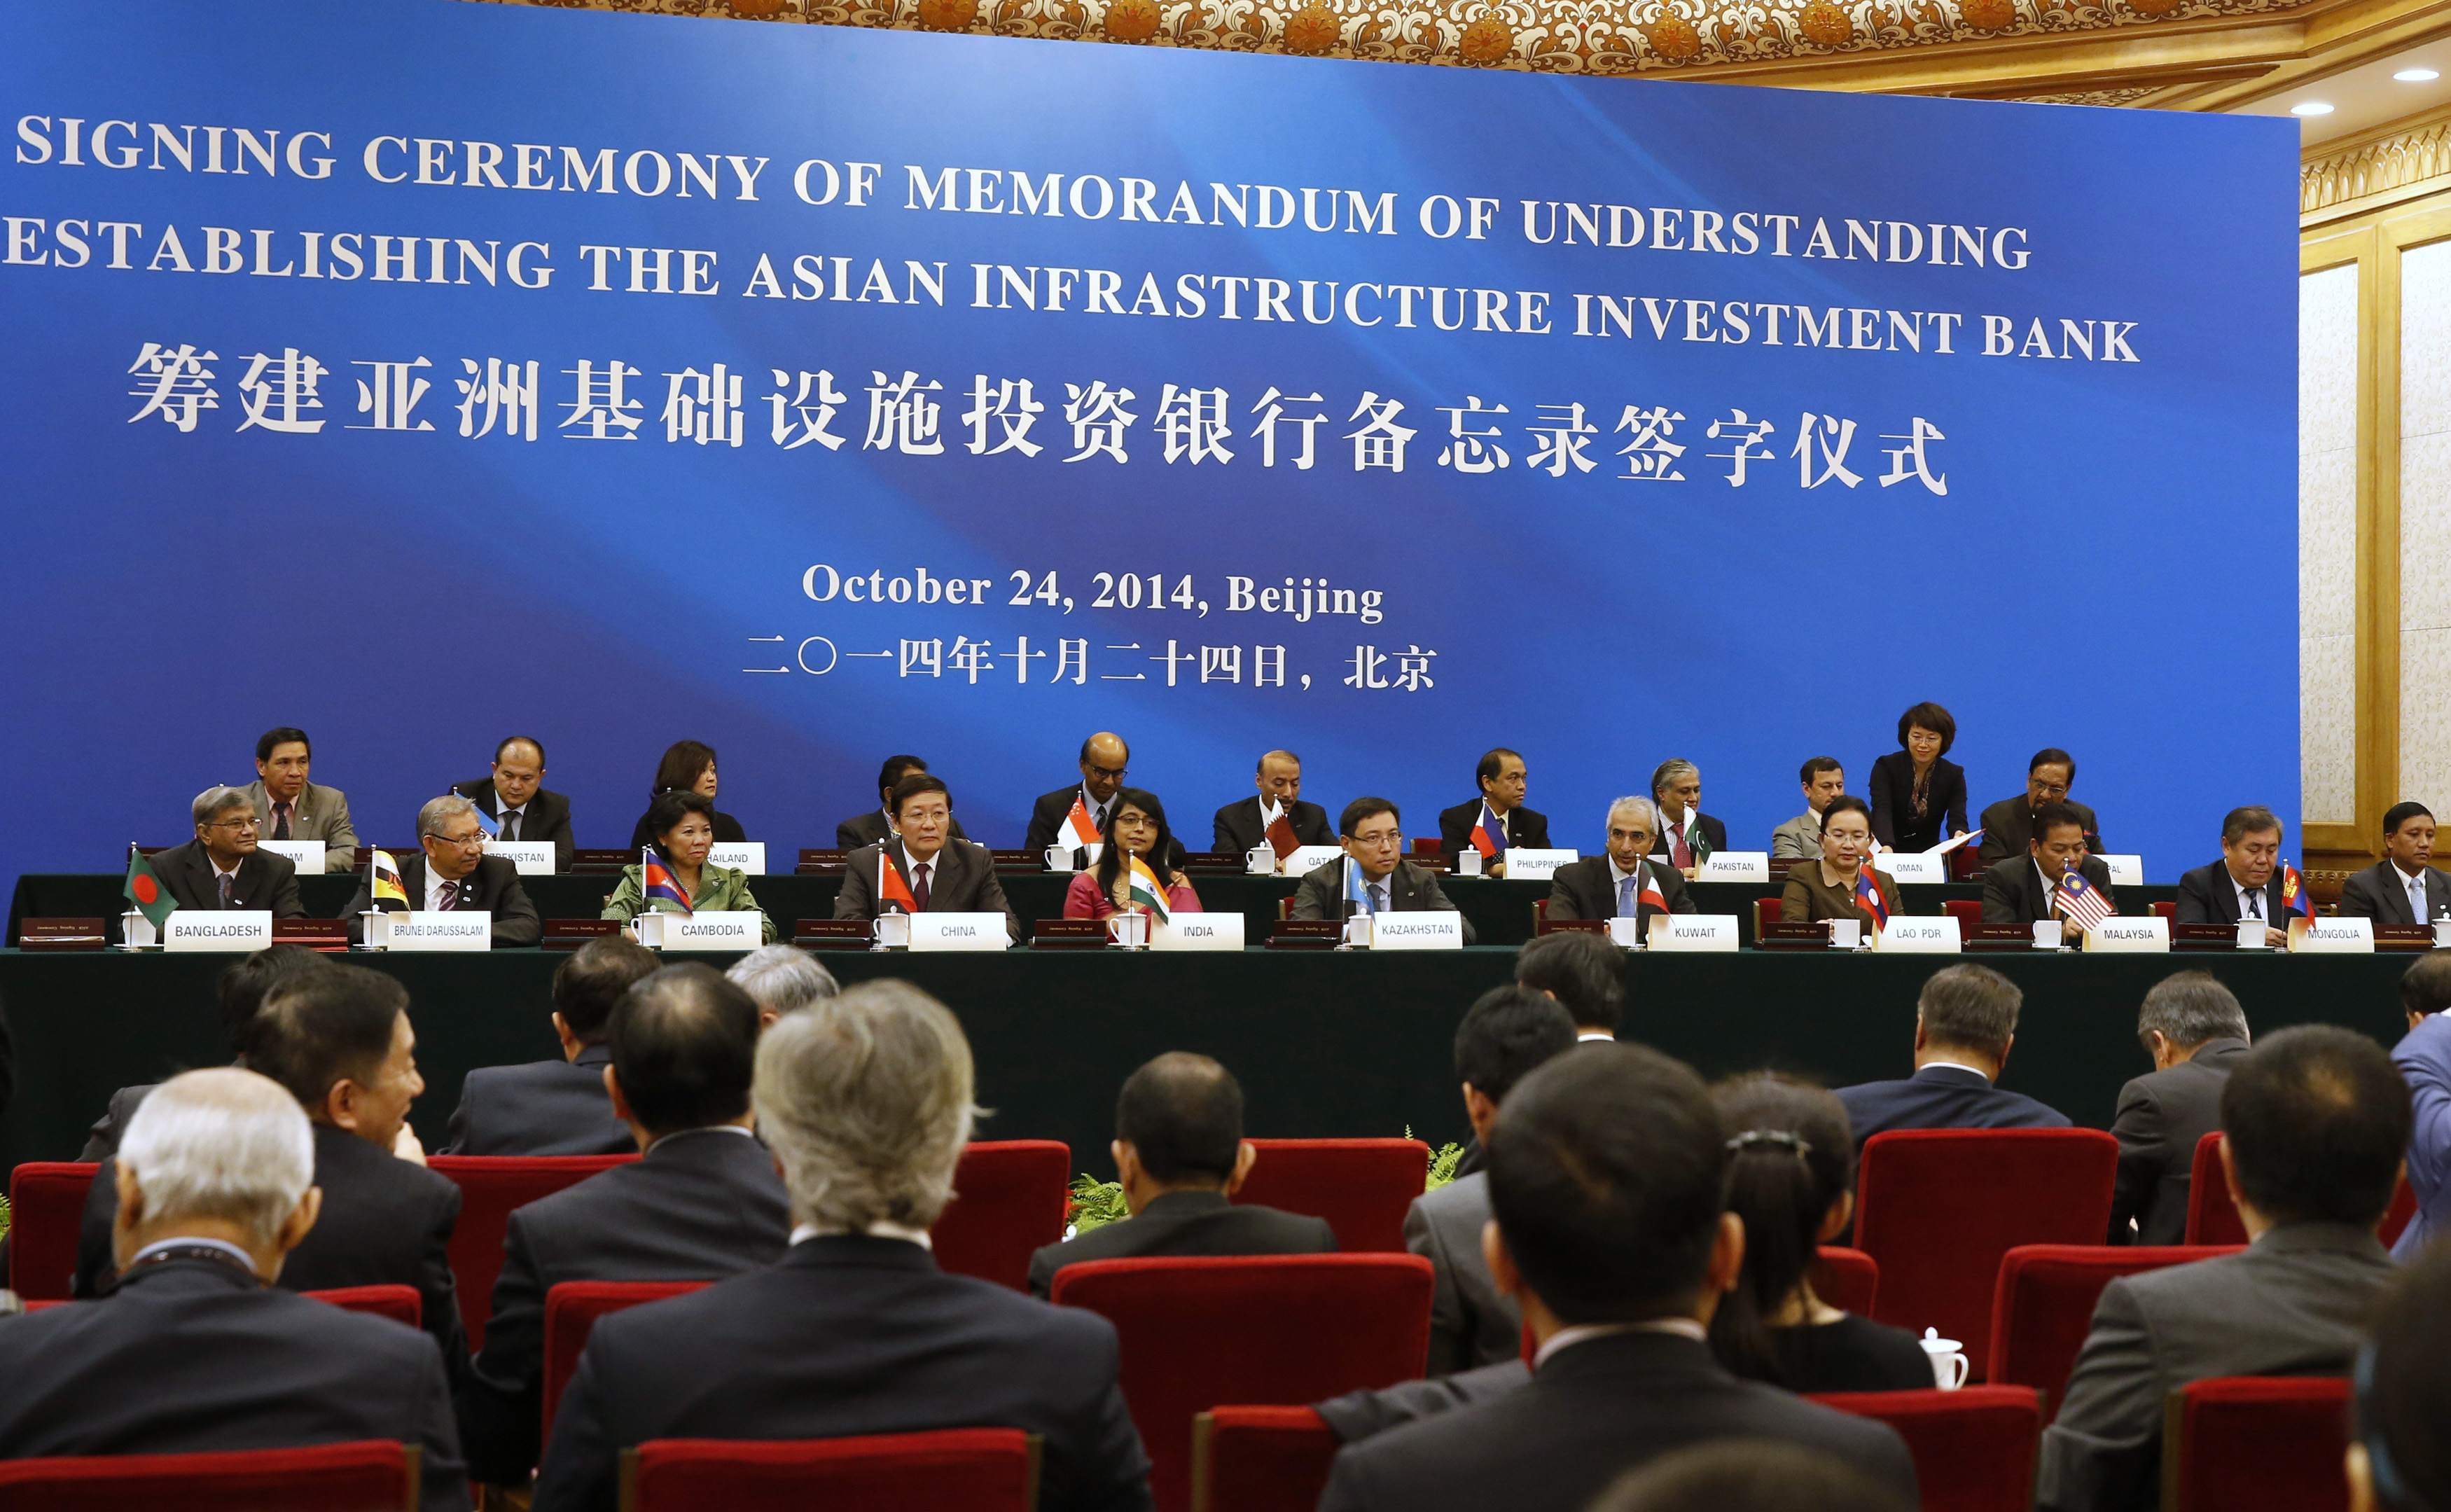 A general view of the signing ceremony of the Asian Infrastructure Investment Bank at the Great Hall of the People in Beijing October 24, 2014 Photo: Reuters, Takaki Yajima